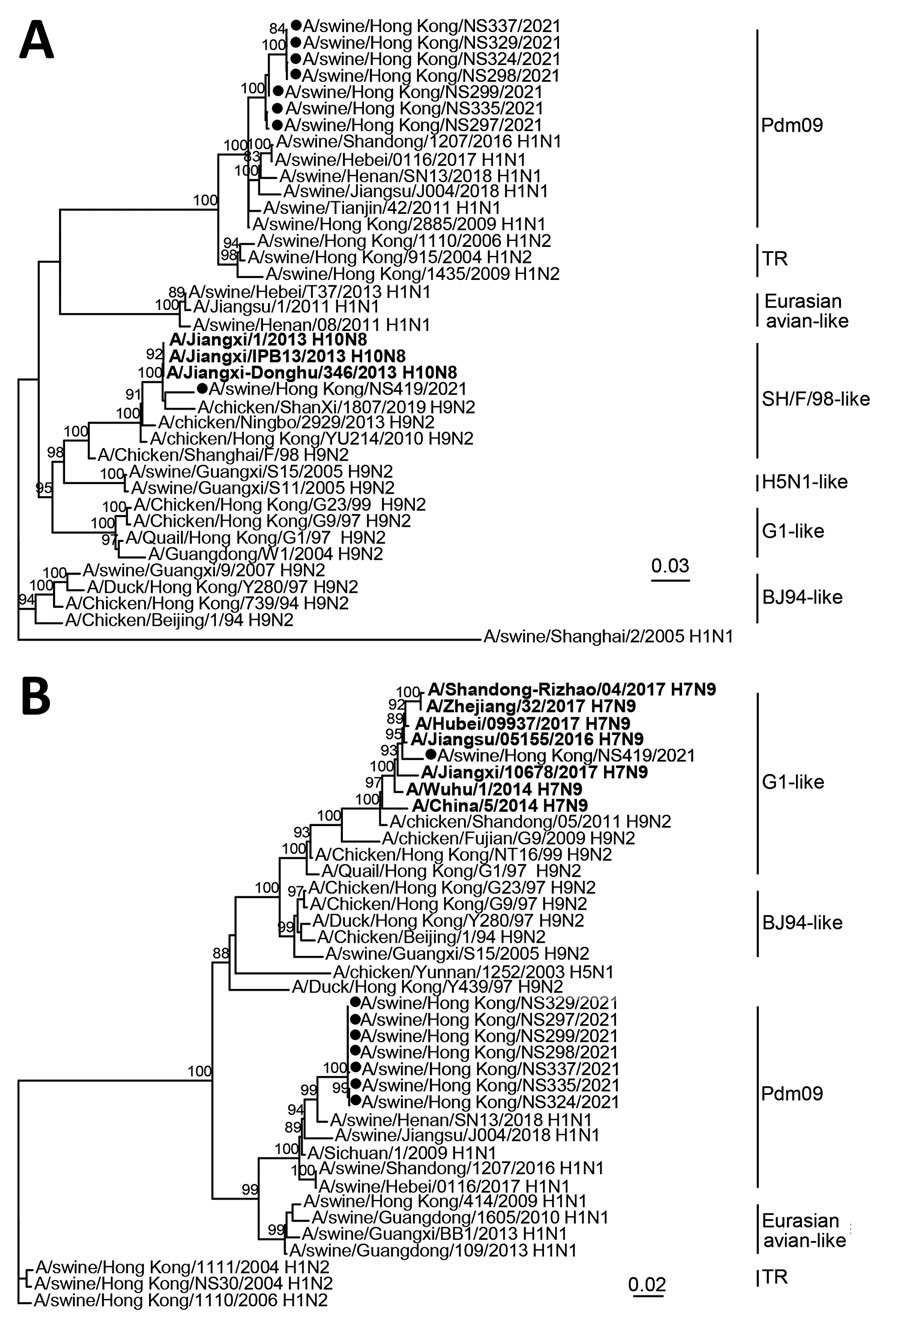 Phylogenetic tree of polymerase basic 1 (A) and matrix (B) gene sequences of swine influenza viruses from China and reference sequences. Bold indicates human H7N9 and H10N8 sequences. Viral sequences generated in this study (black circles) and those downloaded from public domains (Appendix Table) were aligned by using Muscle version 3.8 (http://www.drive5.com/muscle). Phylogenetic trees were constructed by IQ-TREE 1.6.12 (http://www.iqtree.org) by using the generalized time reversible plus gamma model. Major animal viral lineages are as shown. Bootstrap values ≥80% are shown. Scale bar indicates estimated genetic distance.